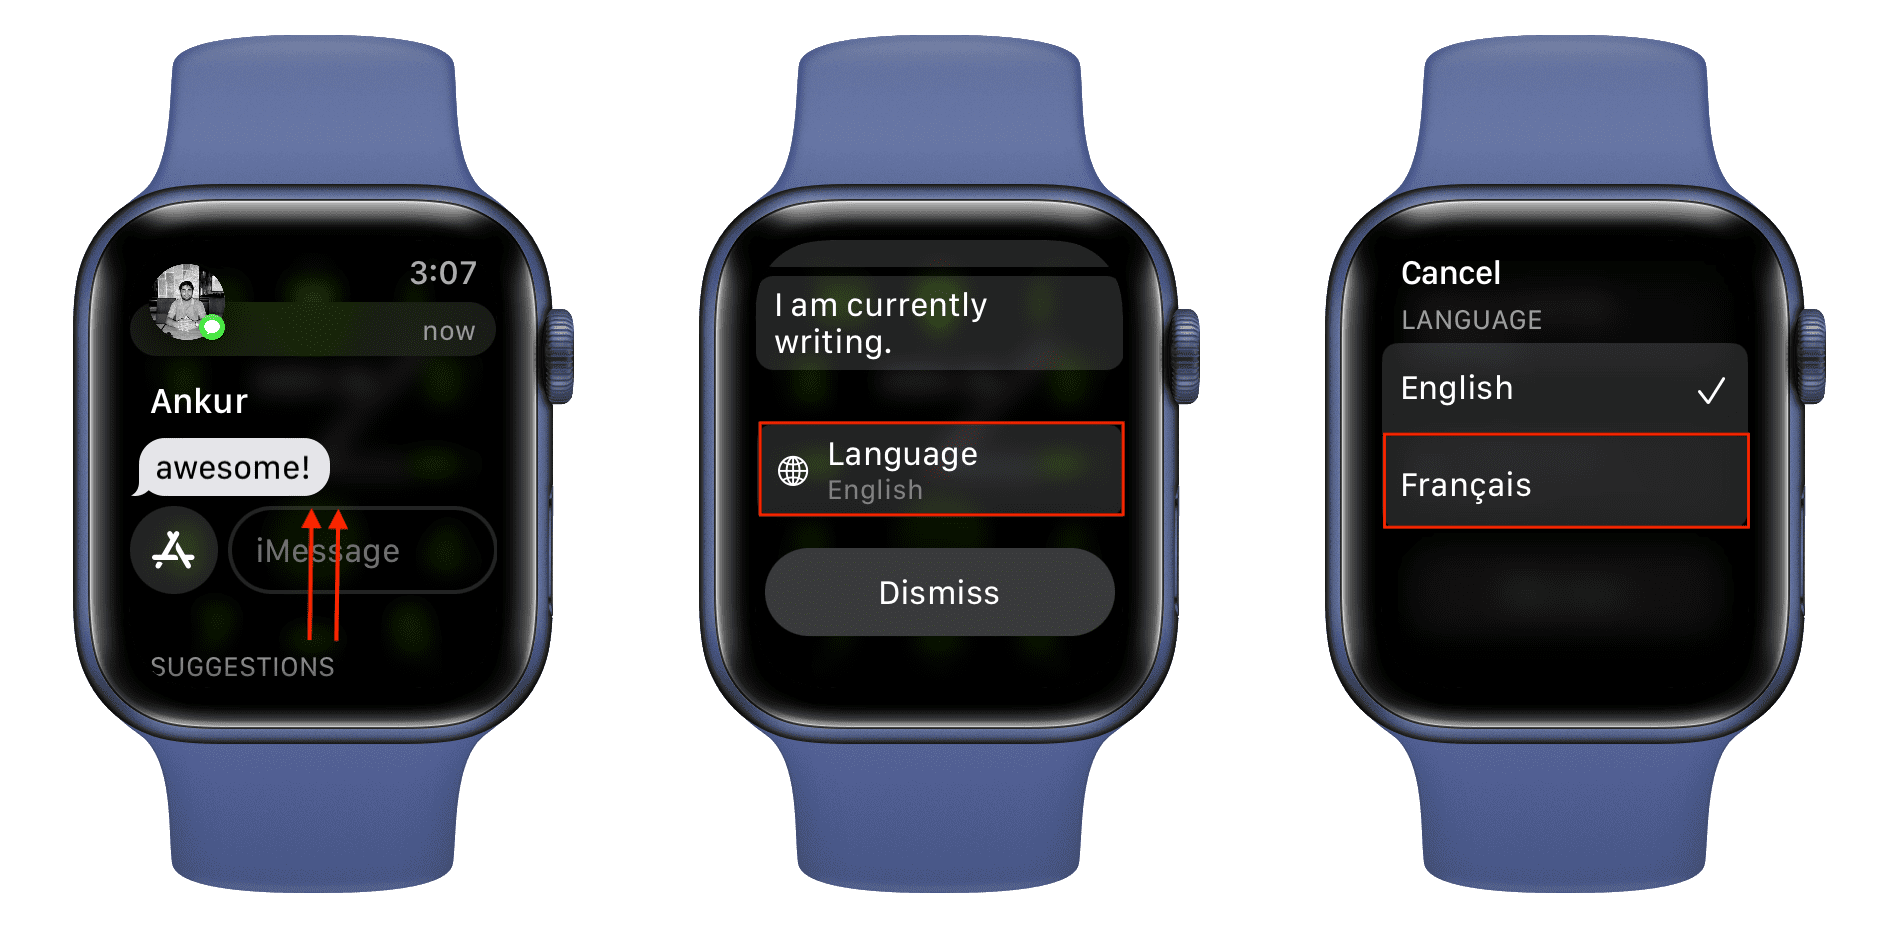 Change language inside the Messages app on Apple Watch